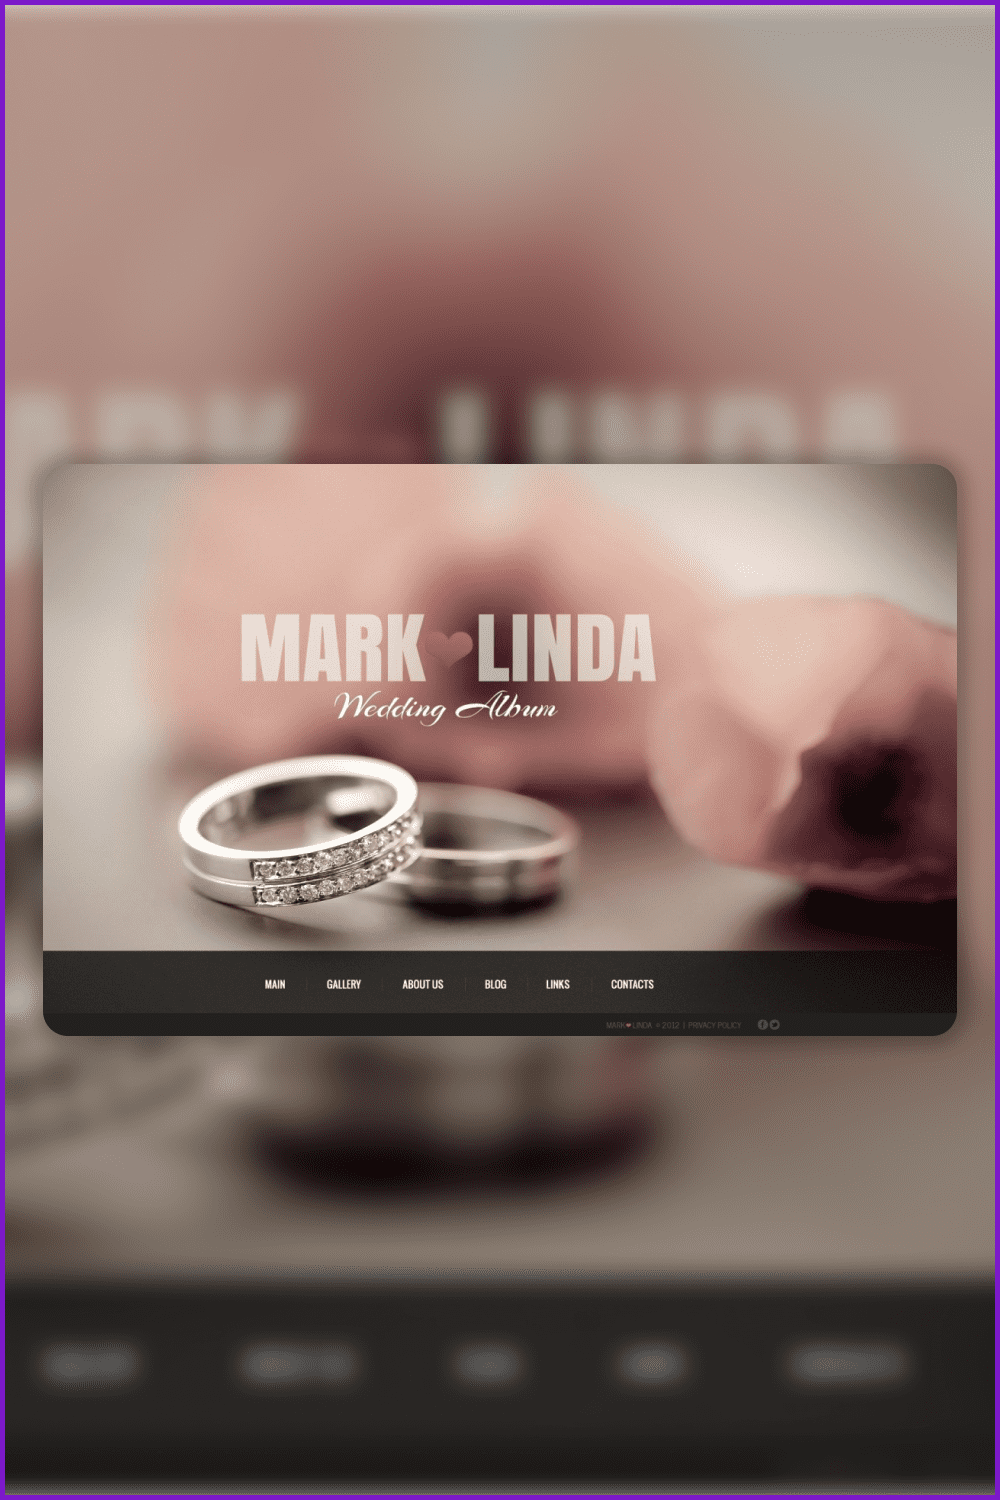 Screenshot of the main page of the site with a large photo of wedding rings on a background of roses.